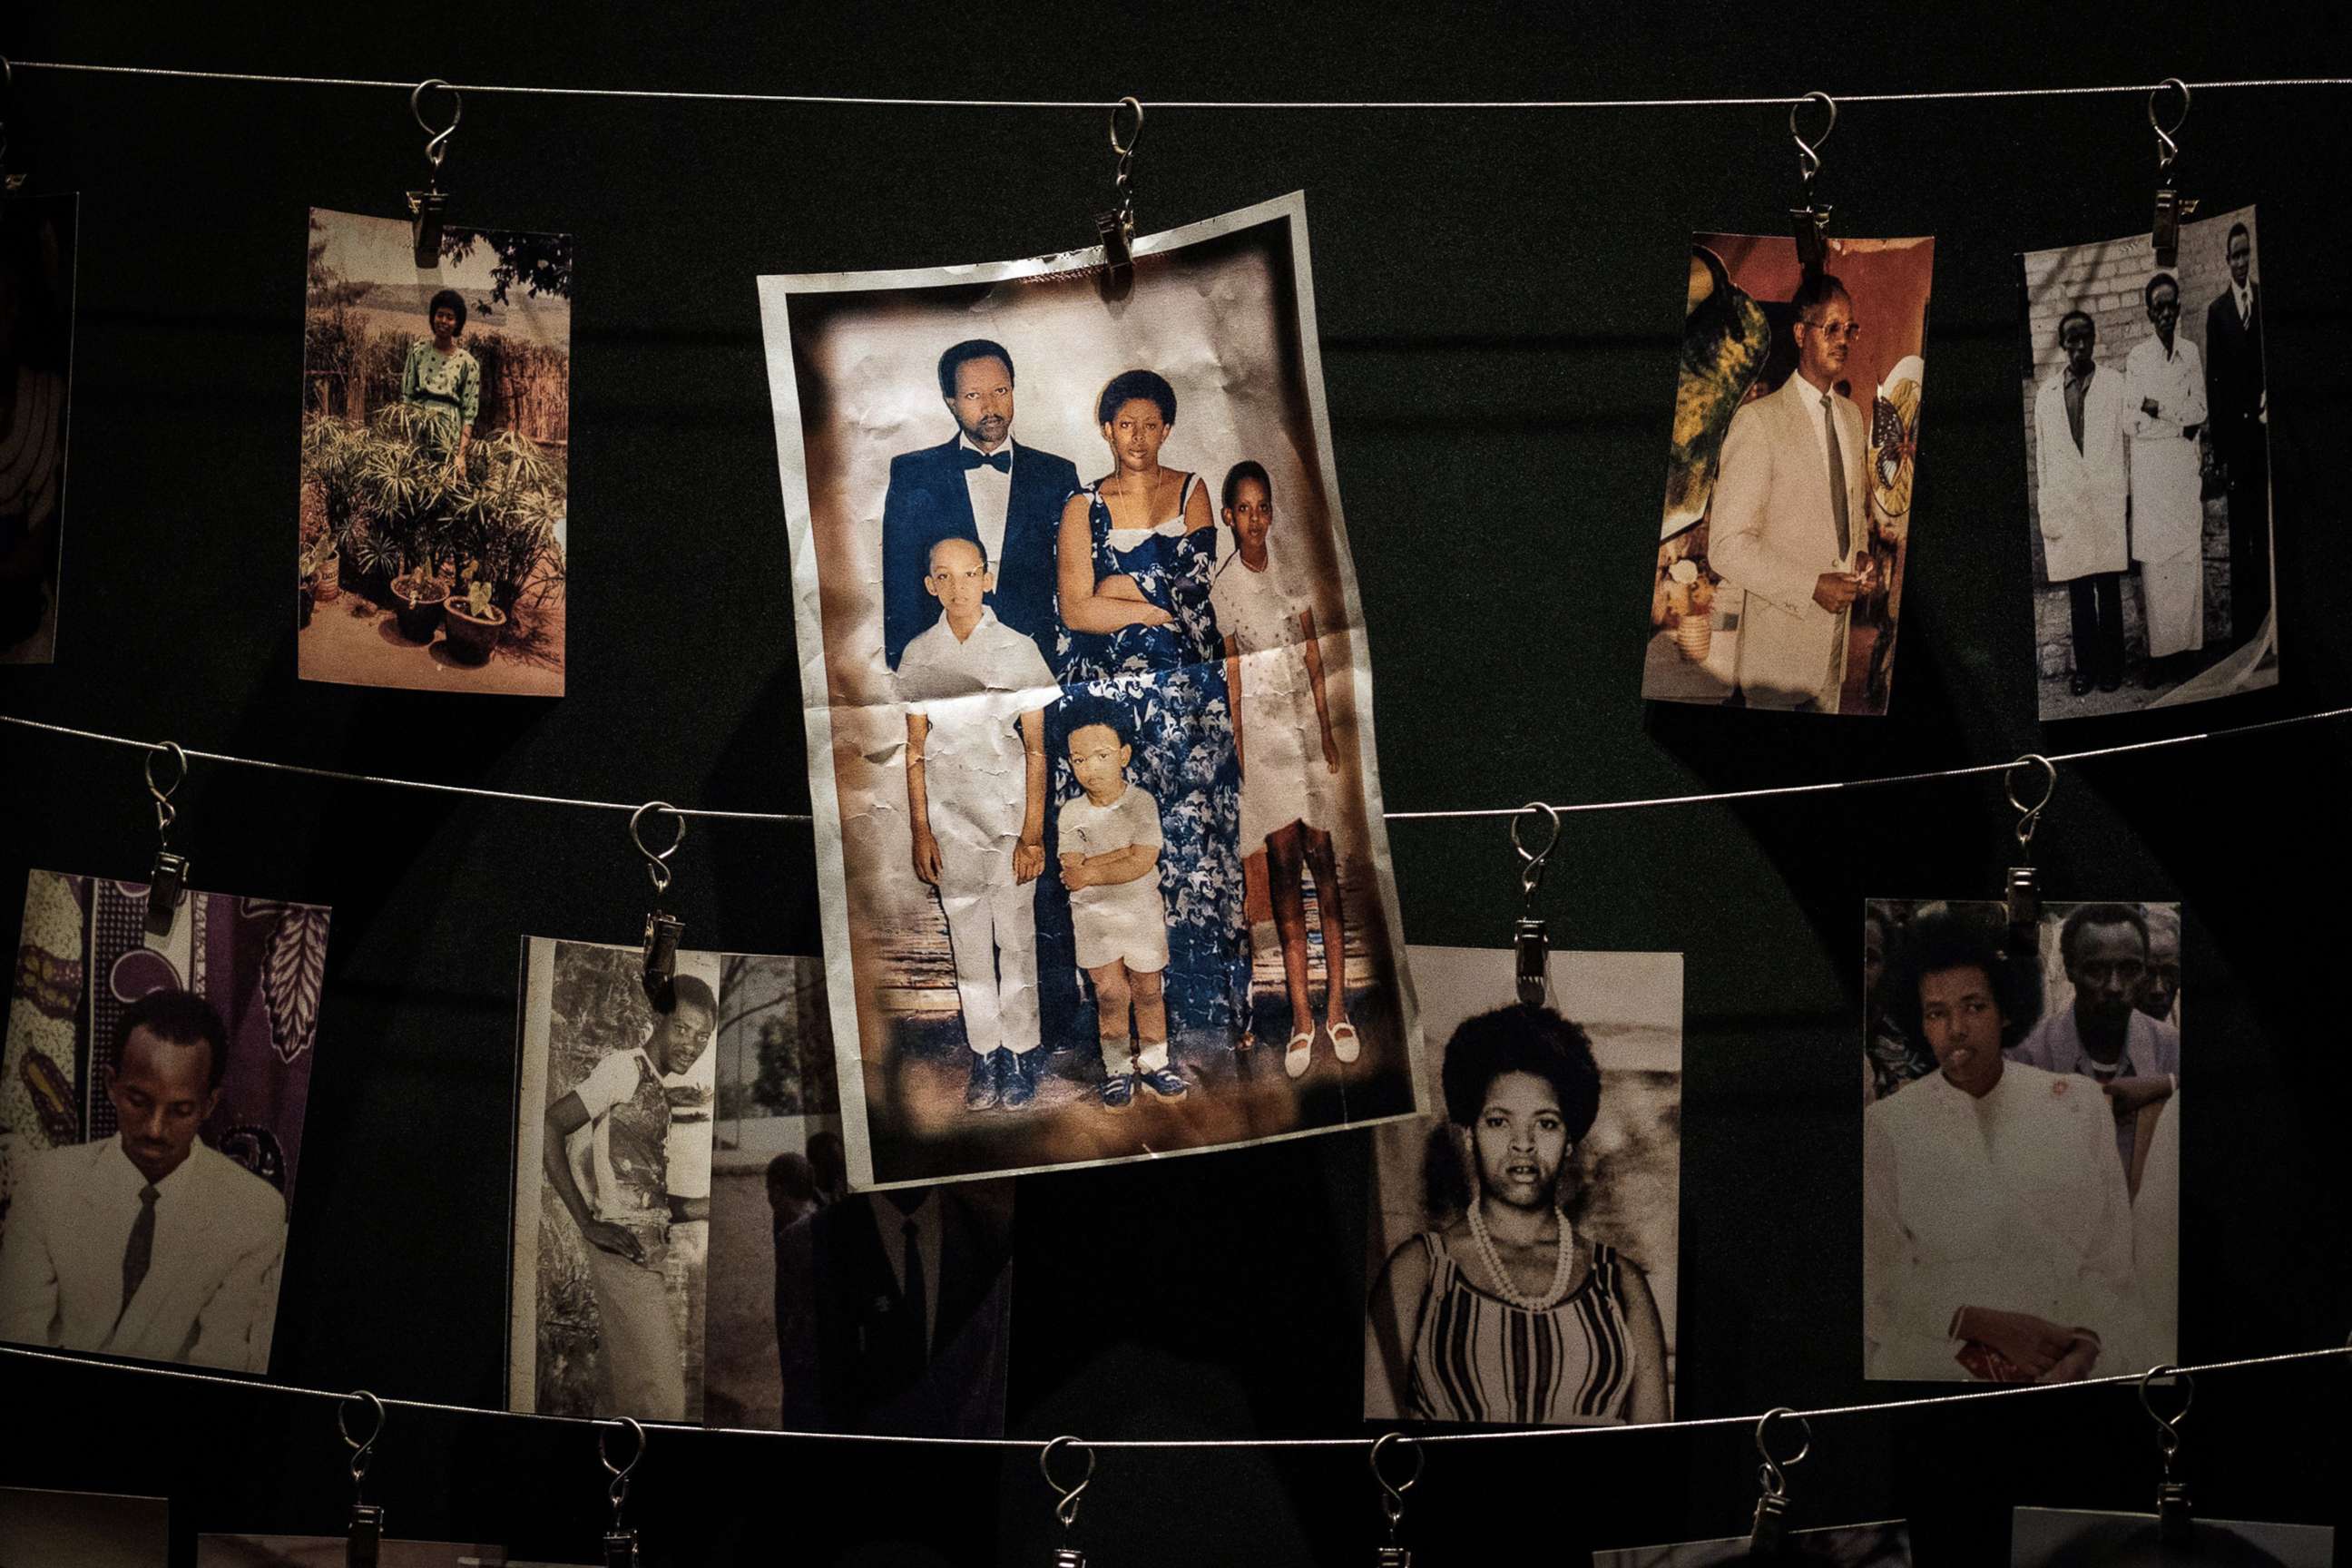 PHOTO: Genocide victims' portraits are displayed during an exhibition at the Kigali Genocide Memorial in Kigali, Rwanda, April 29, 2018.